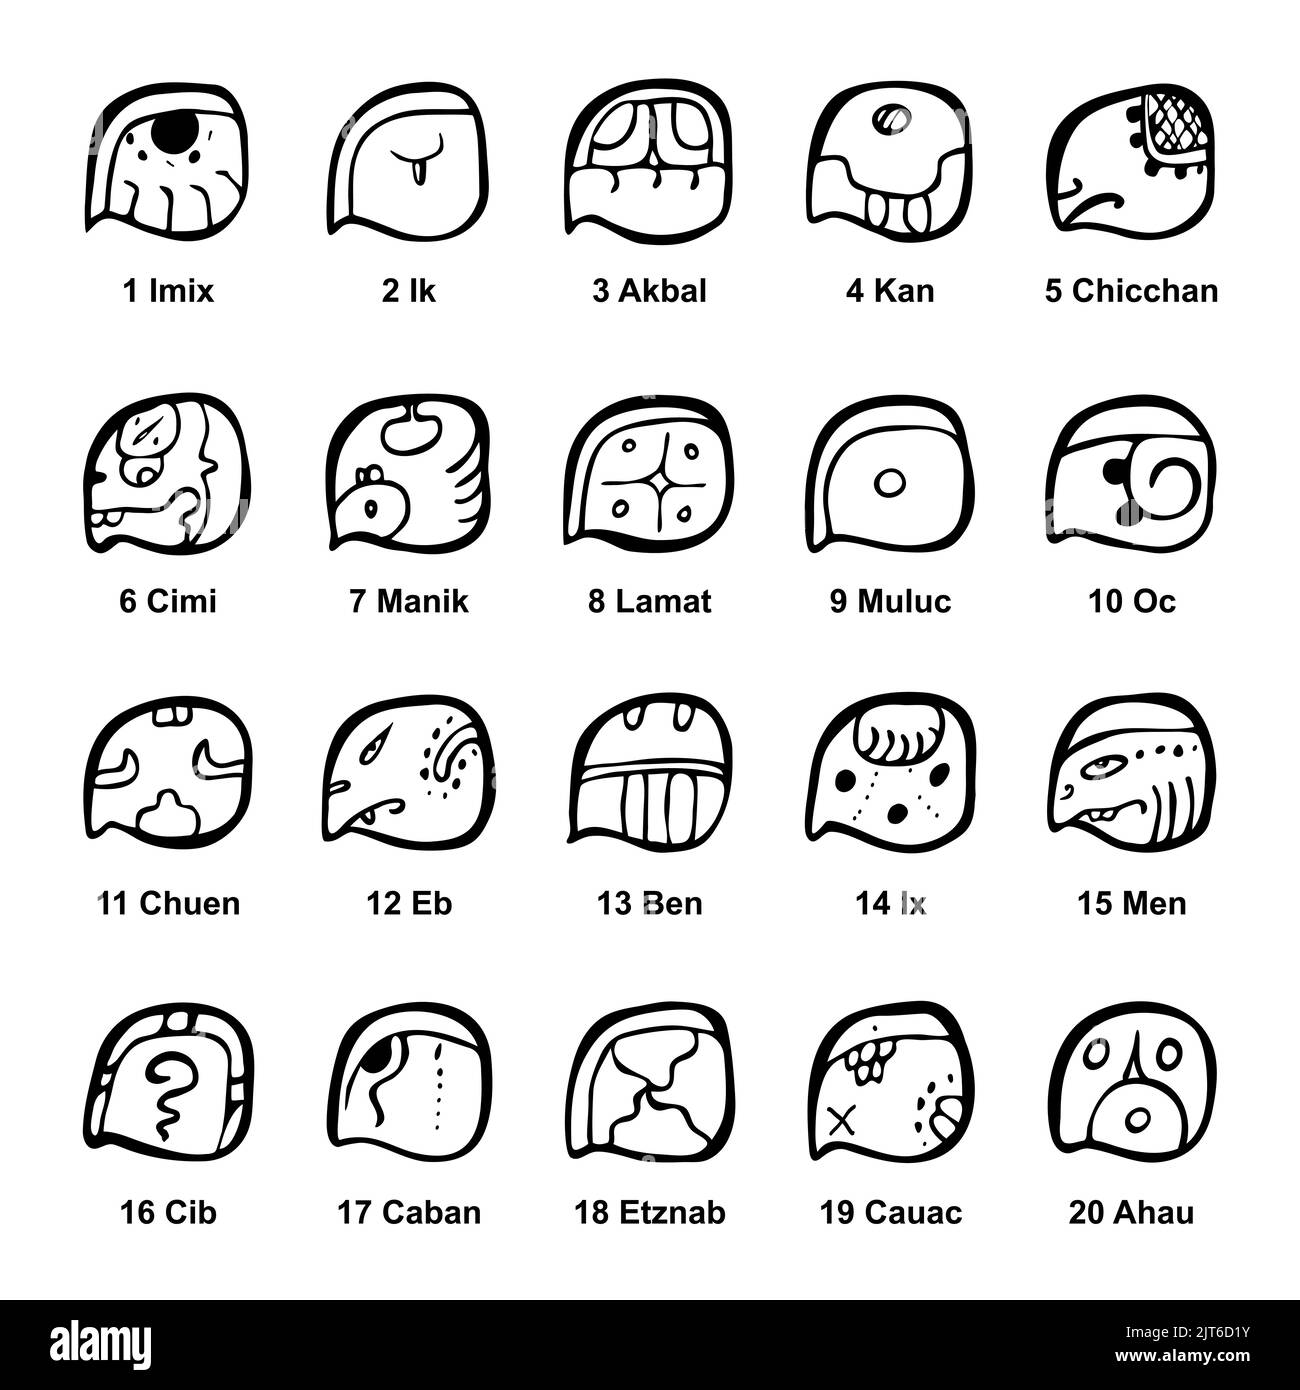 Tzolkin calendar, Maya codex glyphs of the twenty day names. With sequence numbers and with individual names of the 20 days in Yucatec Maya language. Stock Photo